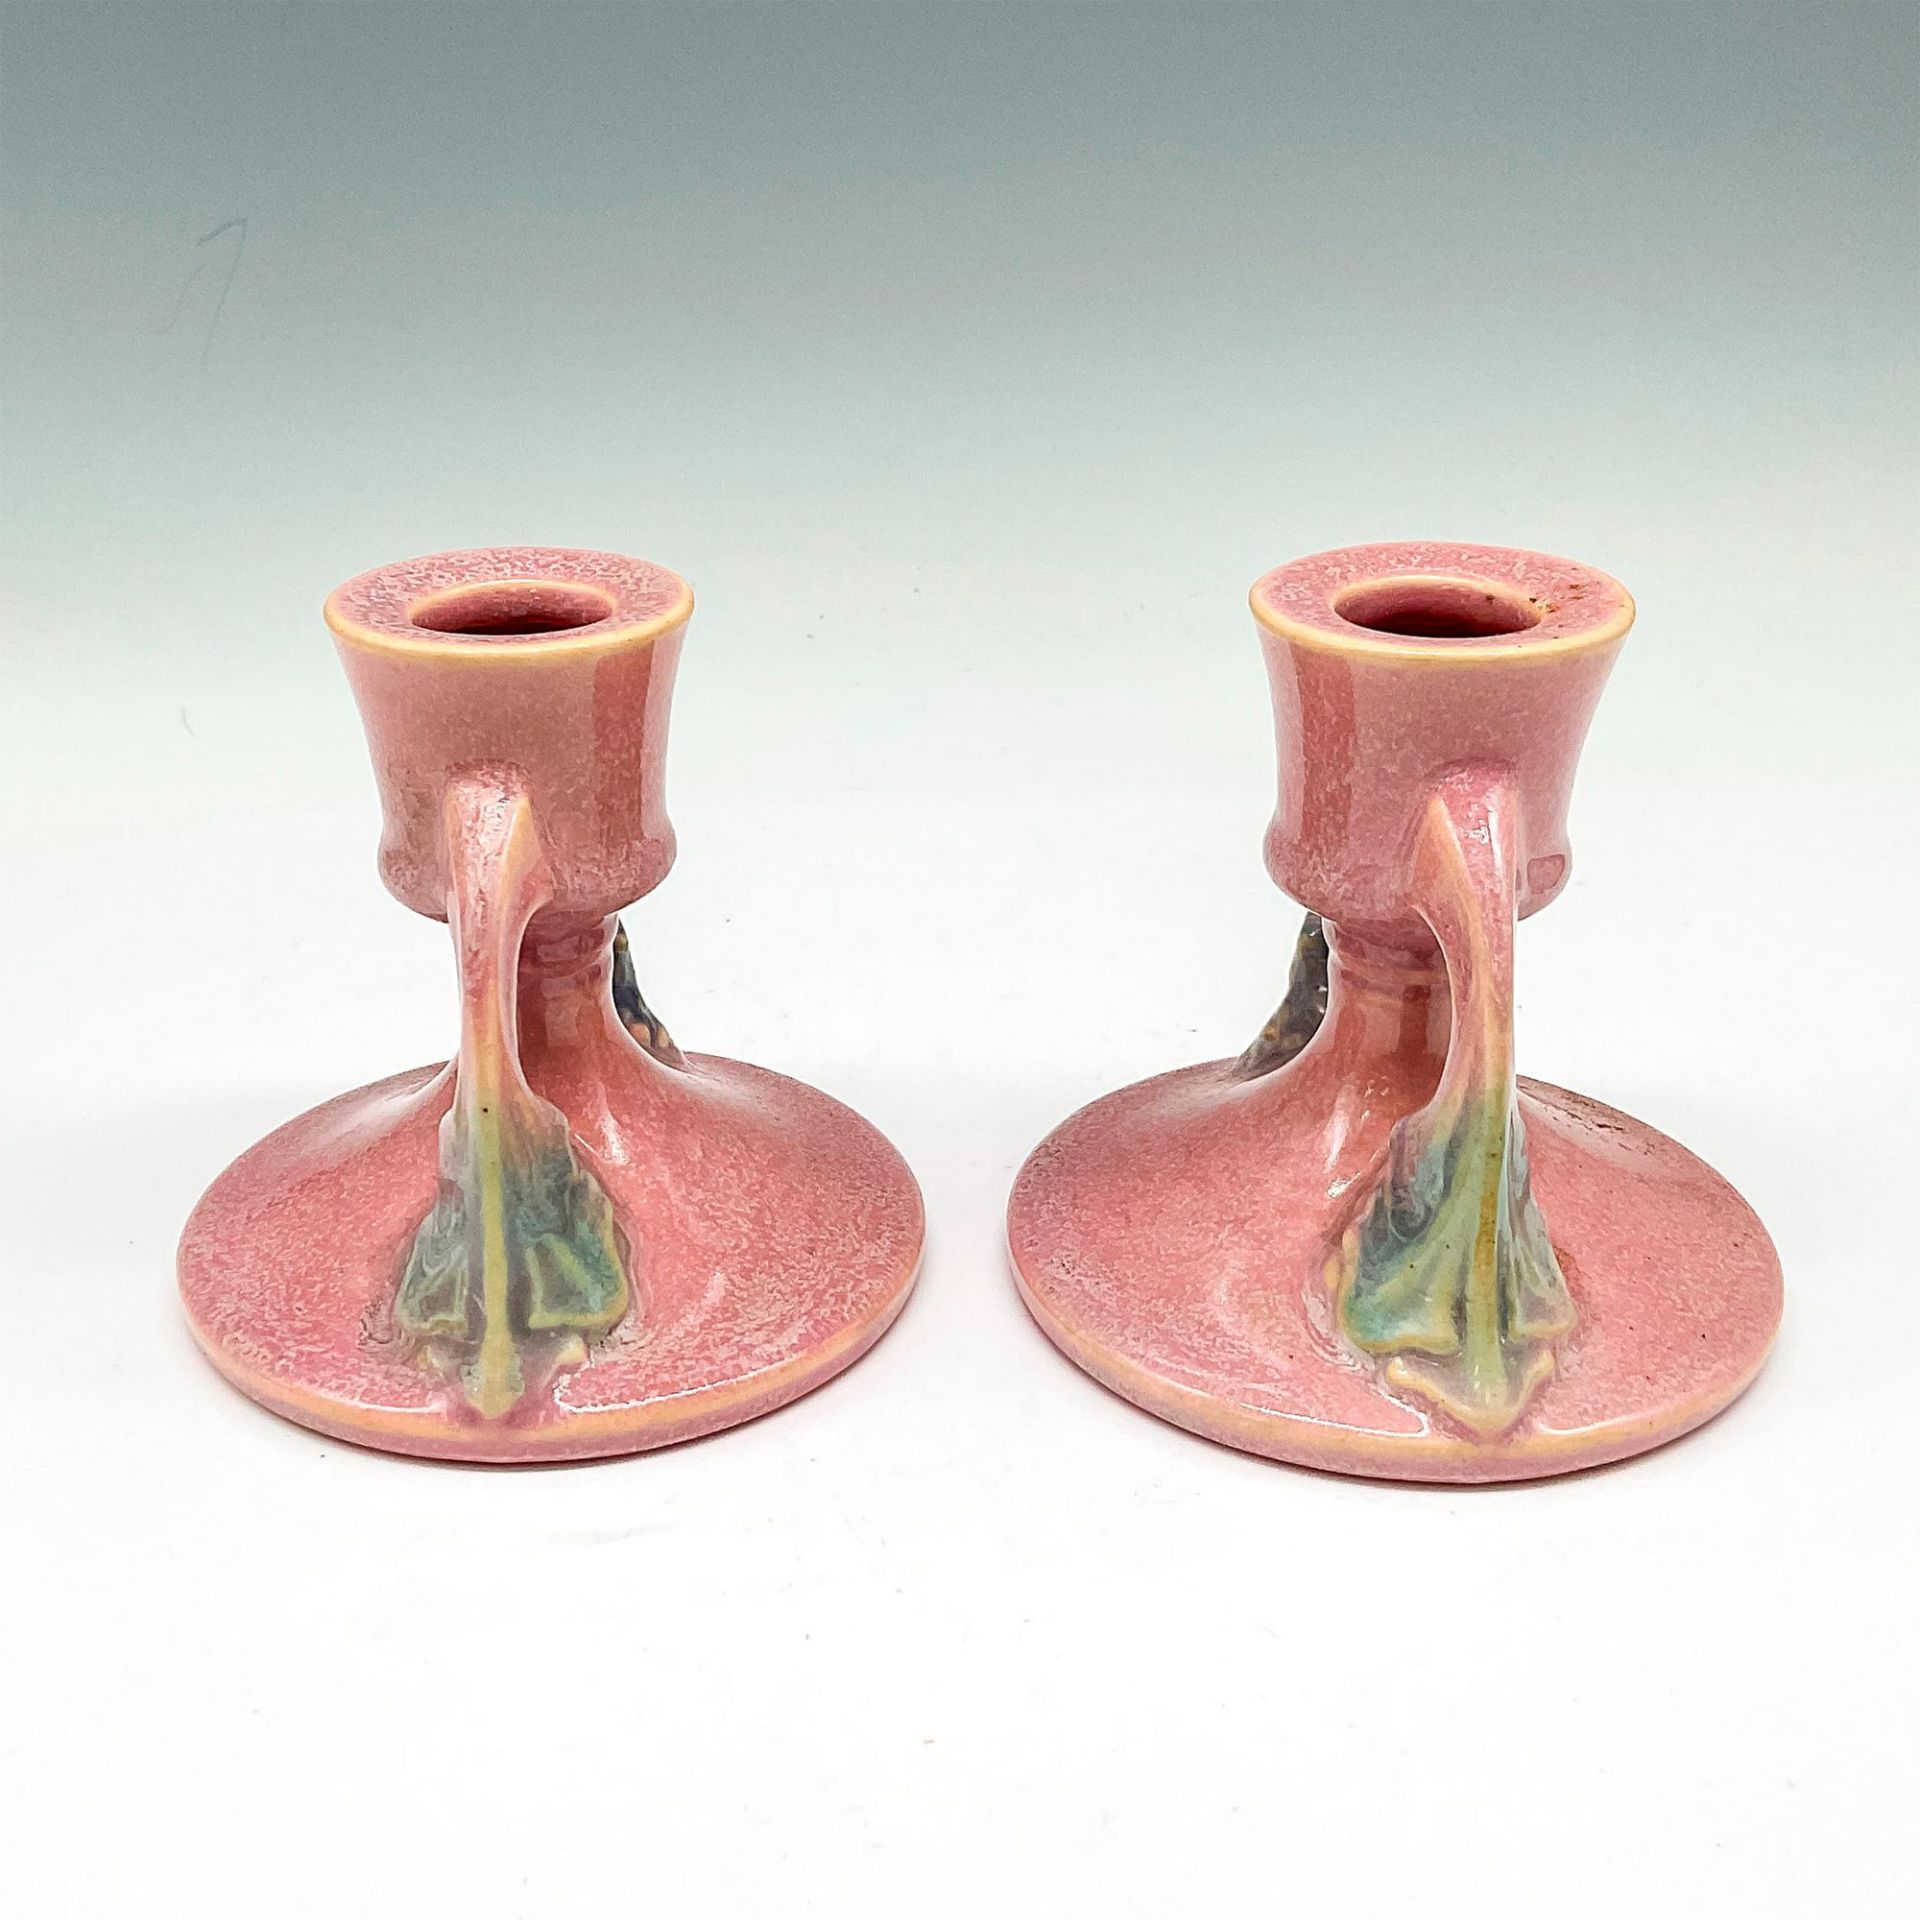 Roseville Pottery Candle Holders, Tuscany Pink - Image 2 of 3